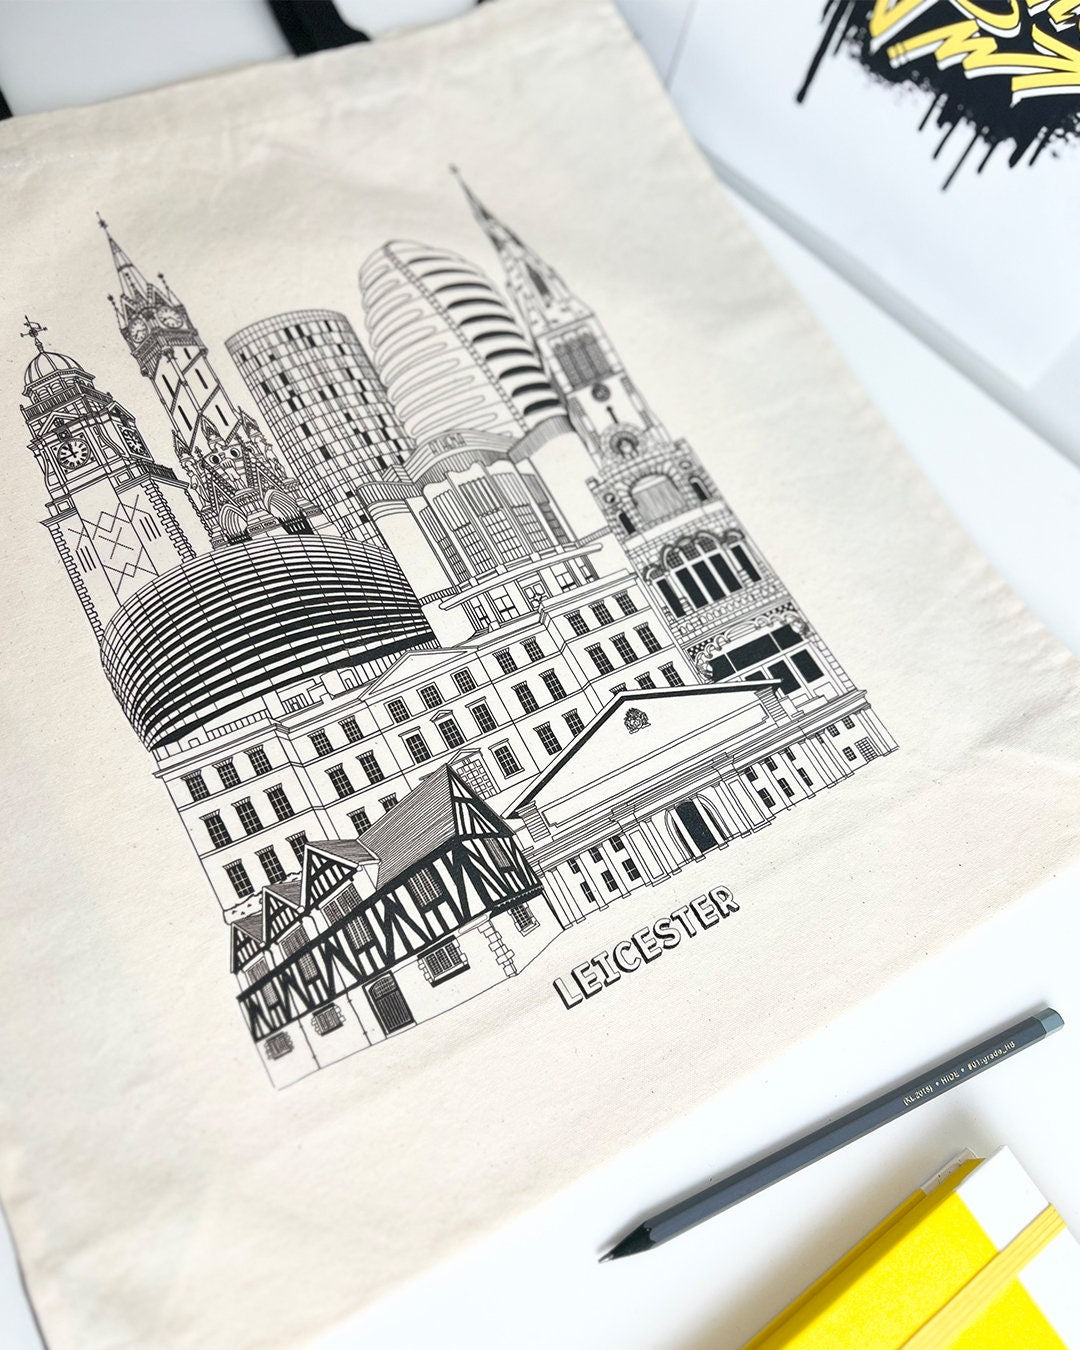 Leicester City Tote Bag